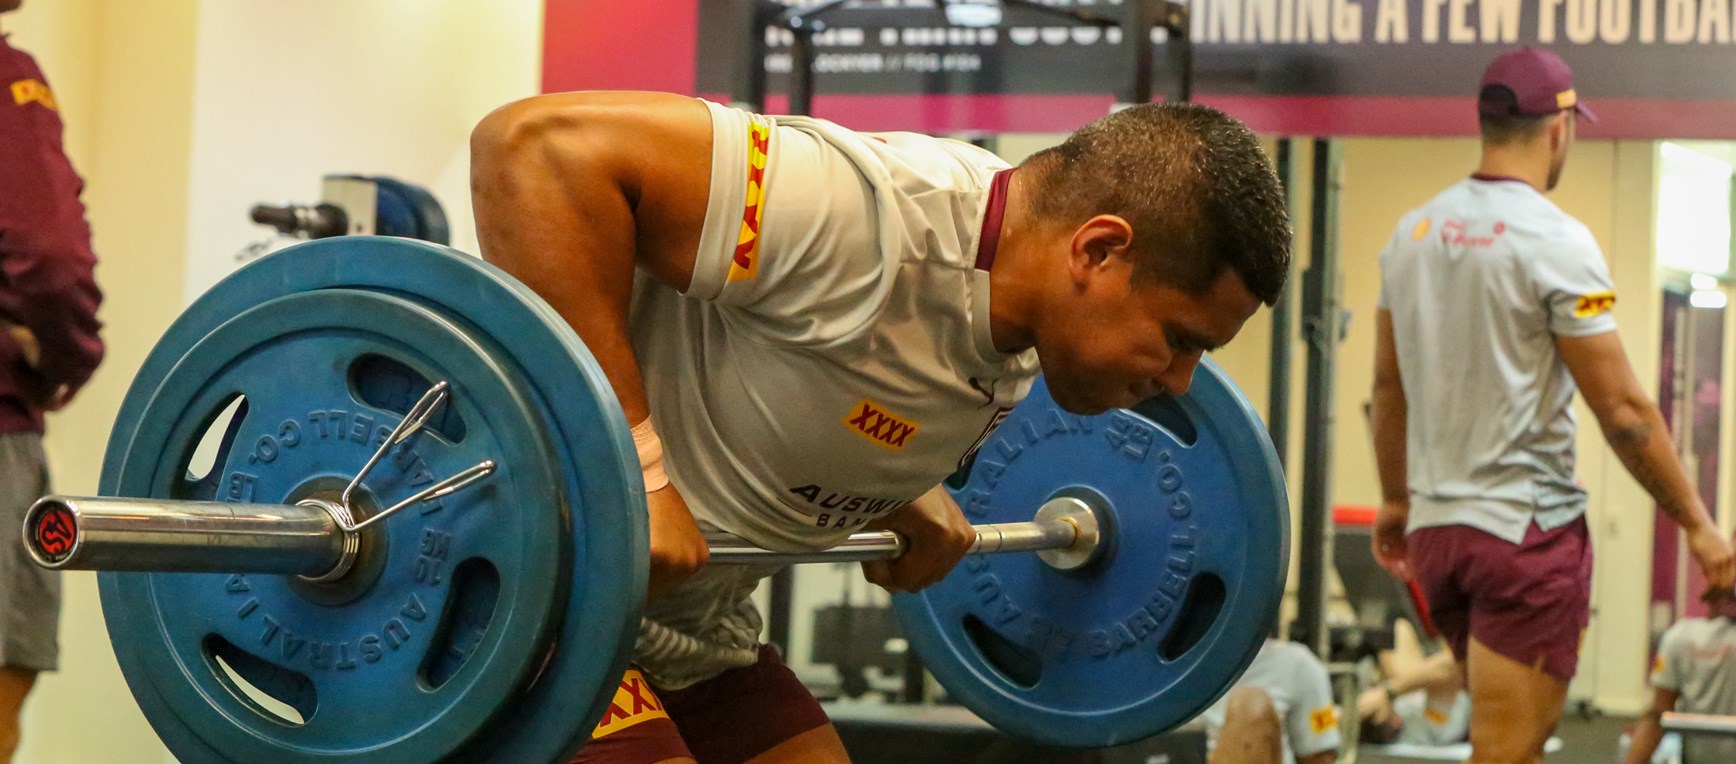 In pictures: Maroons hit the gym in the bubble